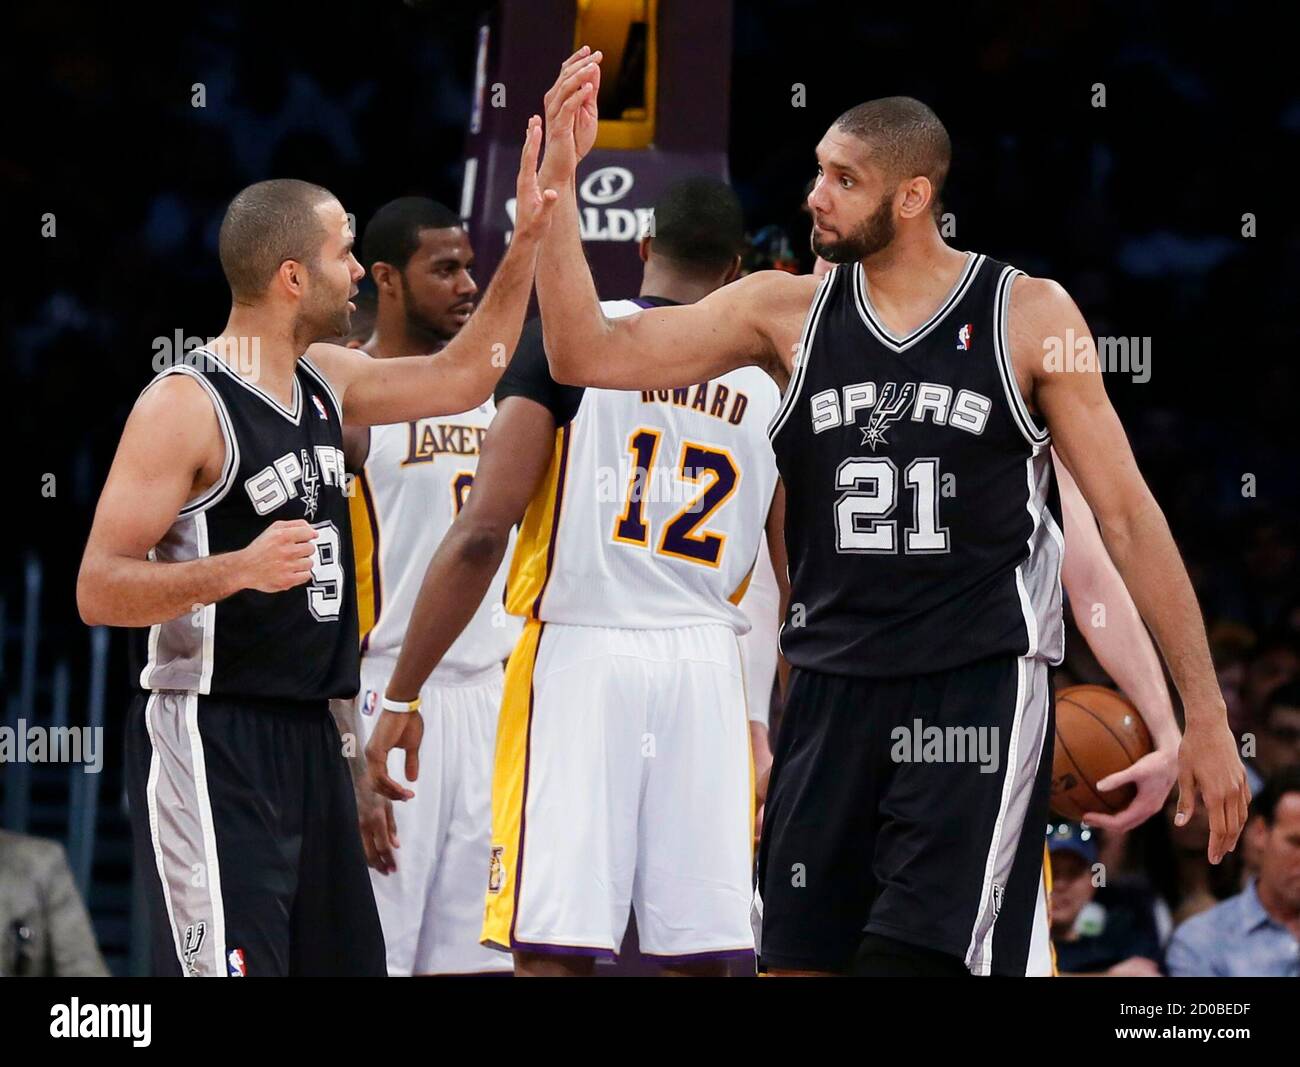 San Antonio Spurs power forward Tim Duncan (21) slaps hands with teammate,  guard Tony Parker (9) during Game 4 of their NBA Western Conference  Quarterfinals basketball playoff series against the Los Angeles